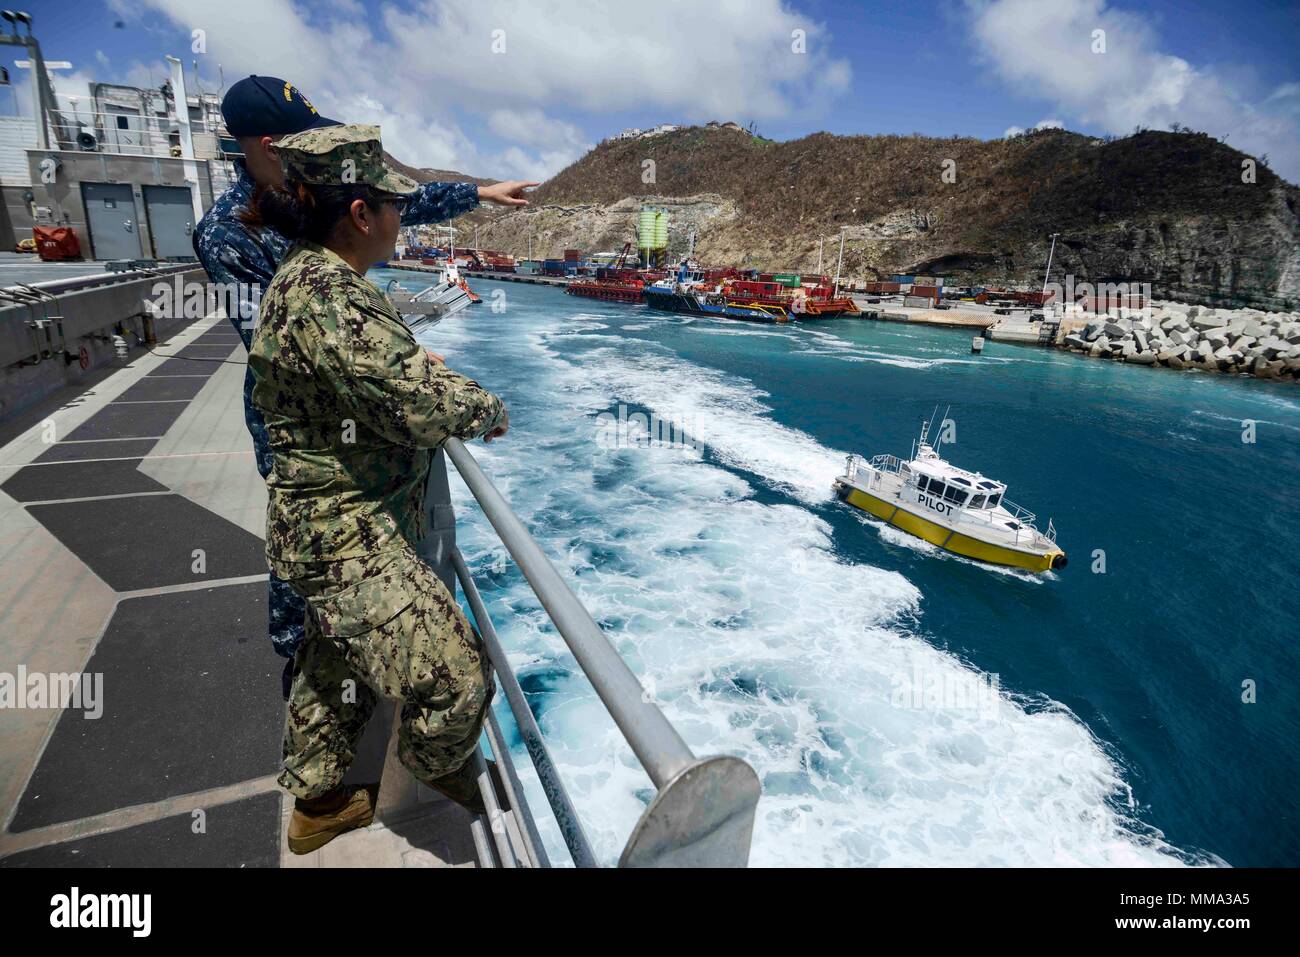 170917-N-KW679-0055 PHILIPSBURG, Sint Maarten (September 17, 2017) Intelligence Specialist 2nd Class Mason Joyner, left, assigned to Naval Information Forces Fleet Intelligence Adaptive Force Pearl Harbor, and Boatswain's Mate 3rd Class Jazmin Chavez, assigned to Navy Cargo Handling Battalion 1, look upon the island of St. Martin after expeditionary fast transport USNS Spearhead’s (T-EPF 1) departure. Spearhead assisted in humanitarian aid and disaster relief efforts for people affected by Hurricane Irma. SPS 17 is a U.S. Navy deployment executed by U.S. Naval Forces Southern Command/U.S. 4th  Stock Photo